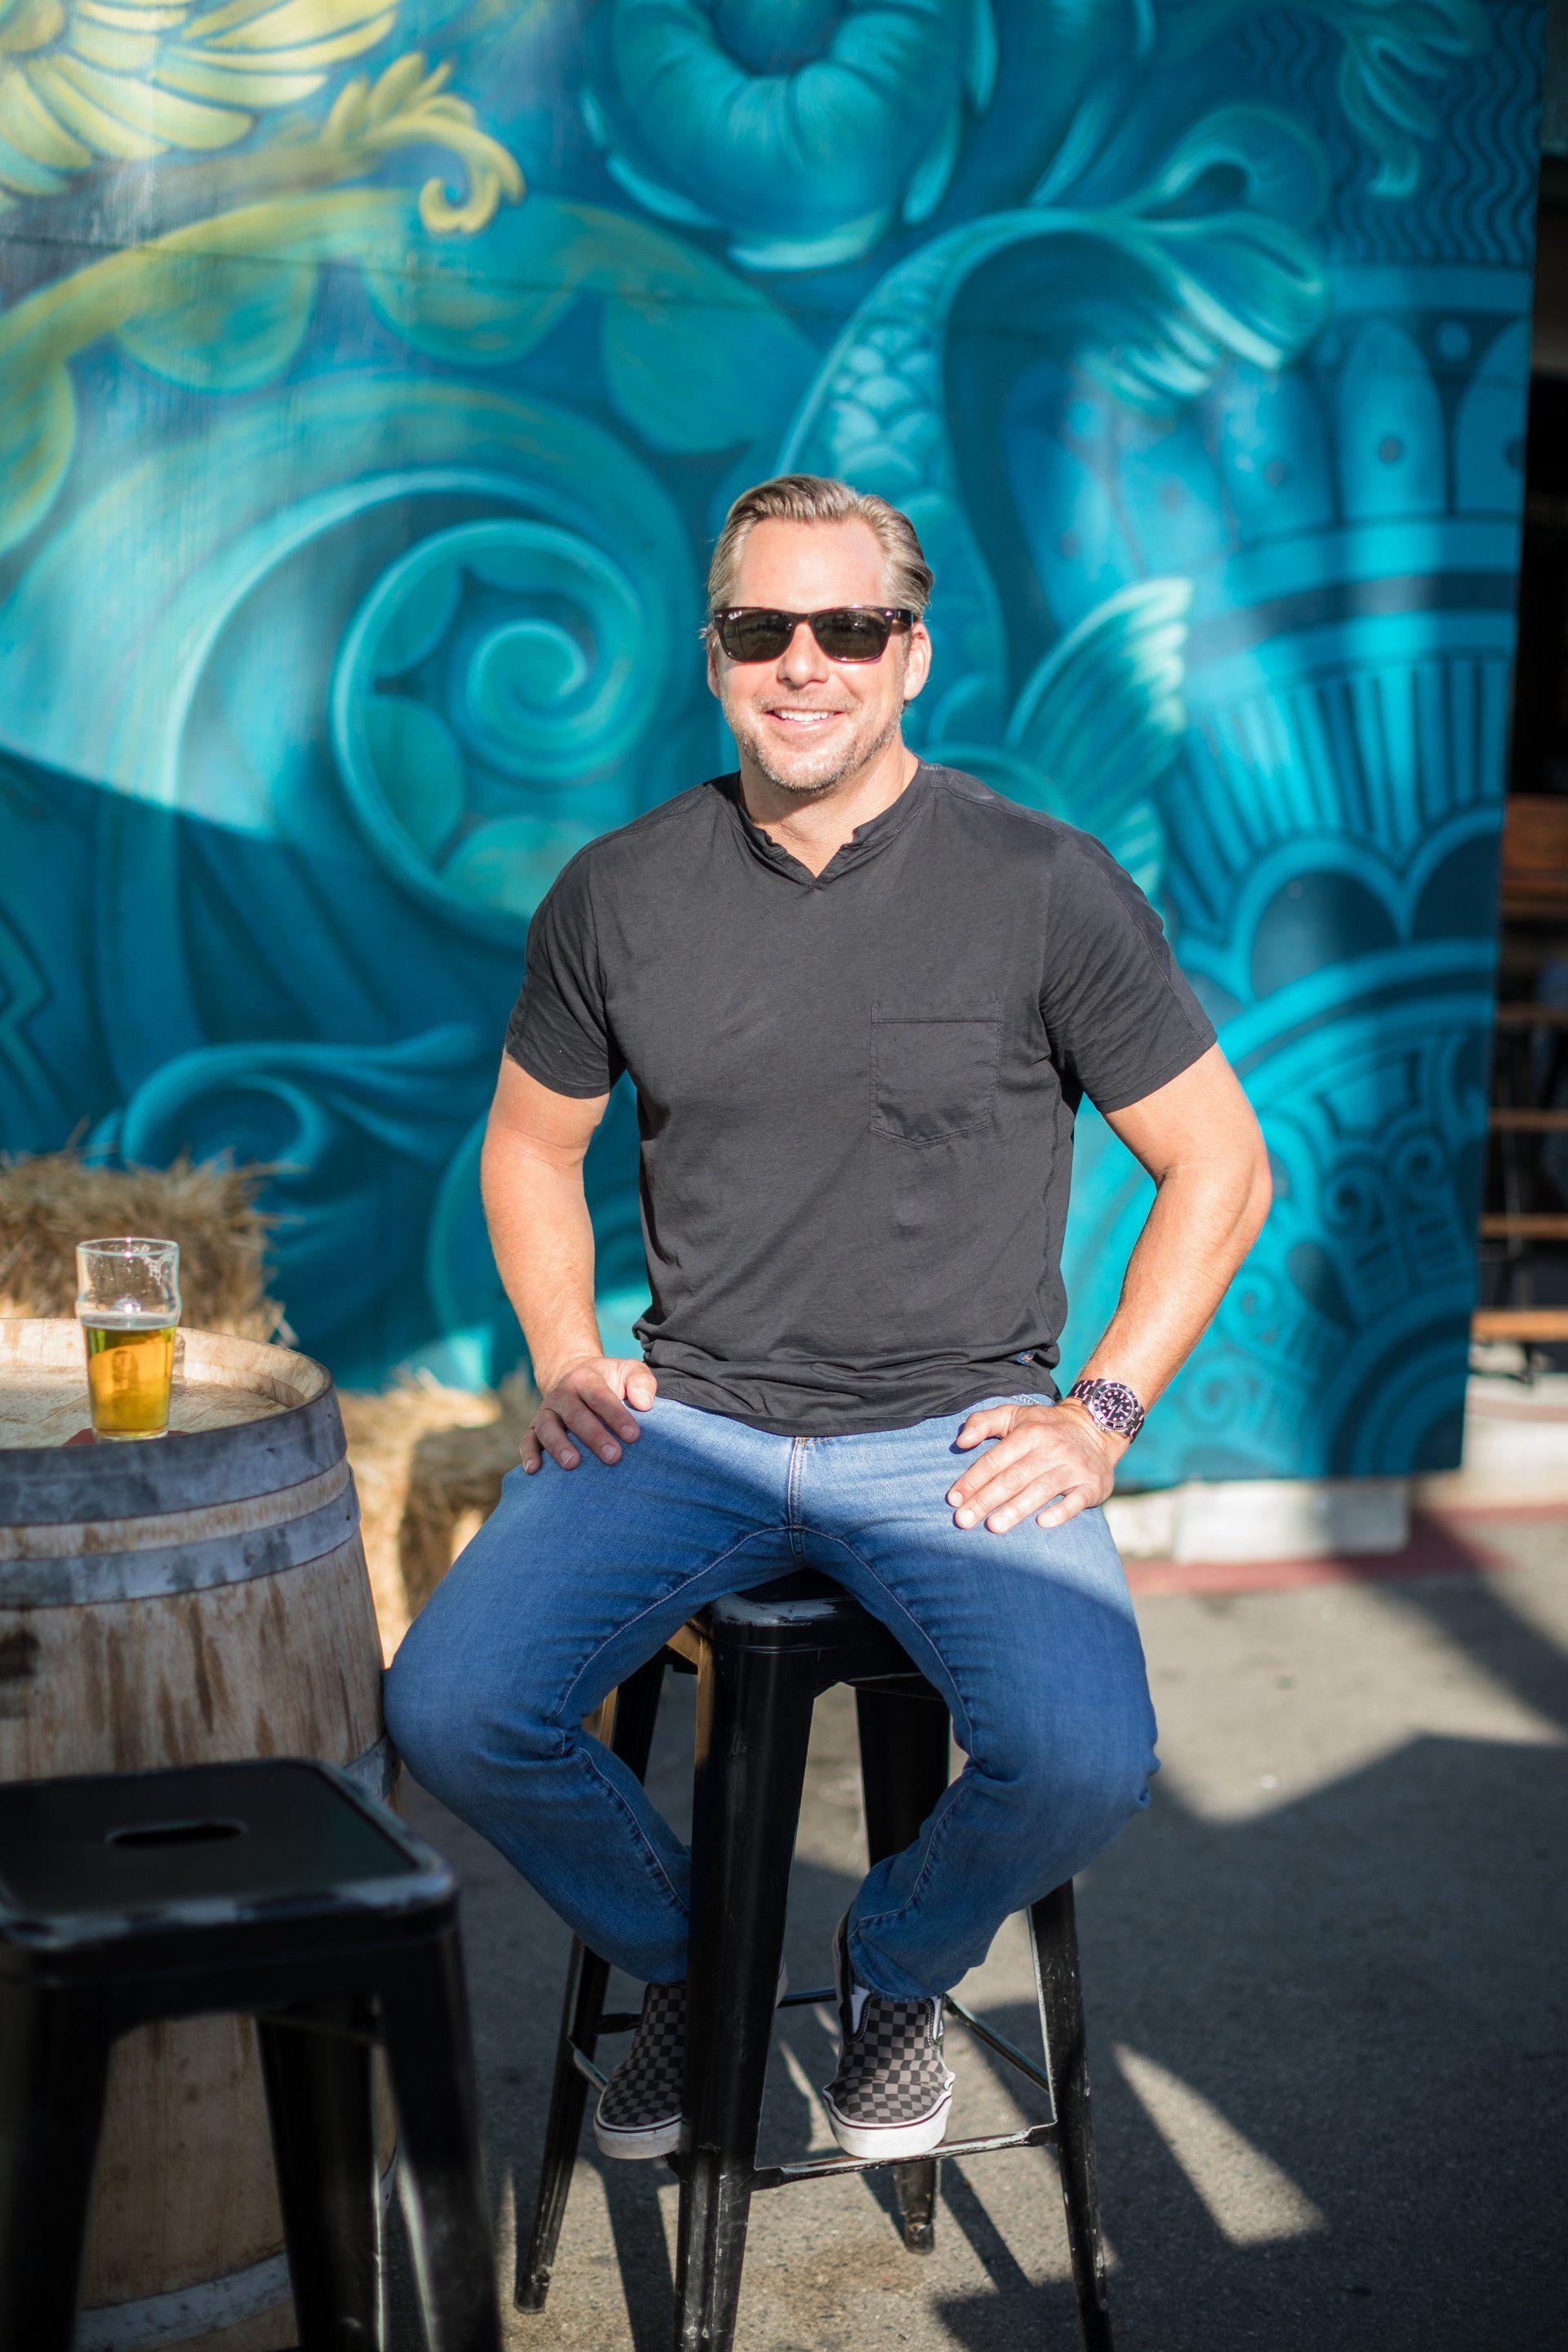 Photoshoot for dating profile highlight a guy in an urban area.  Lifestyle type portraits at Laguna Beach Brewery.